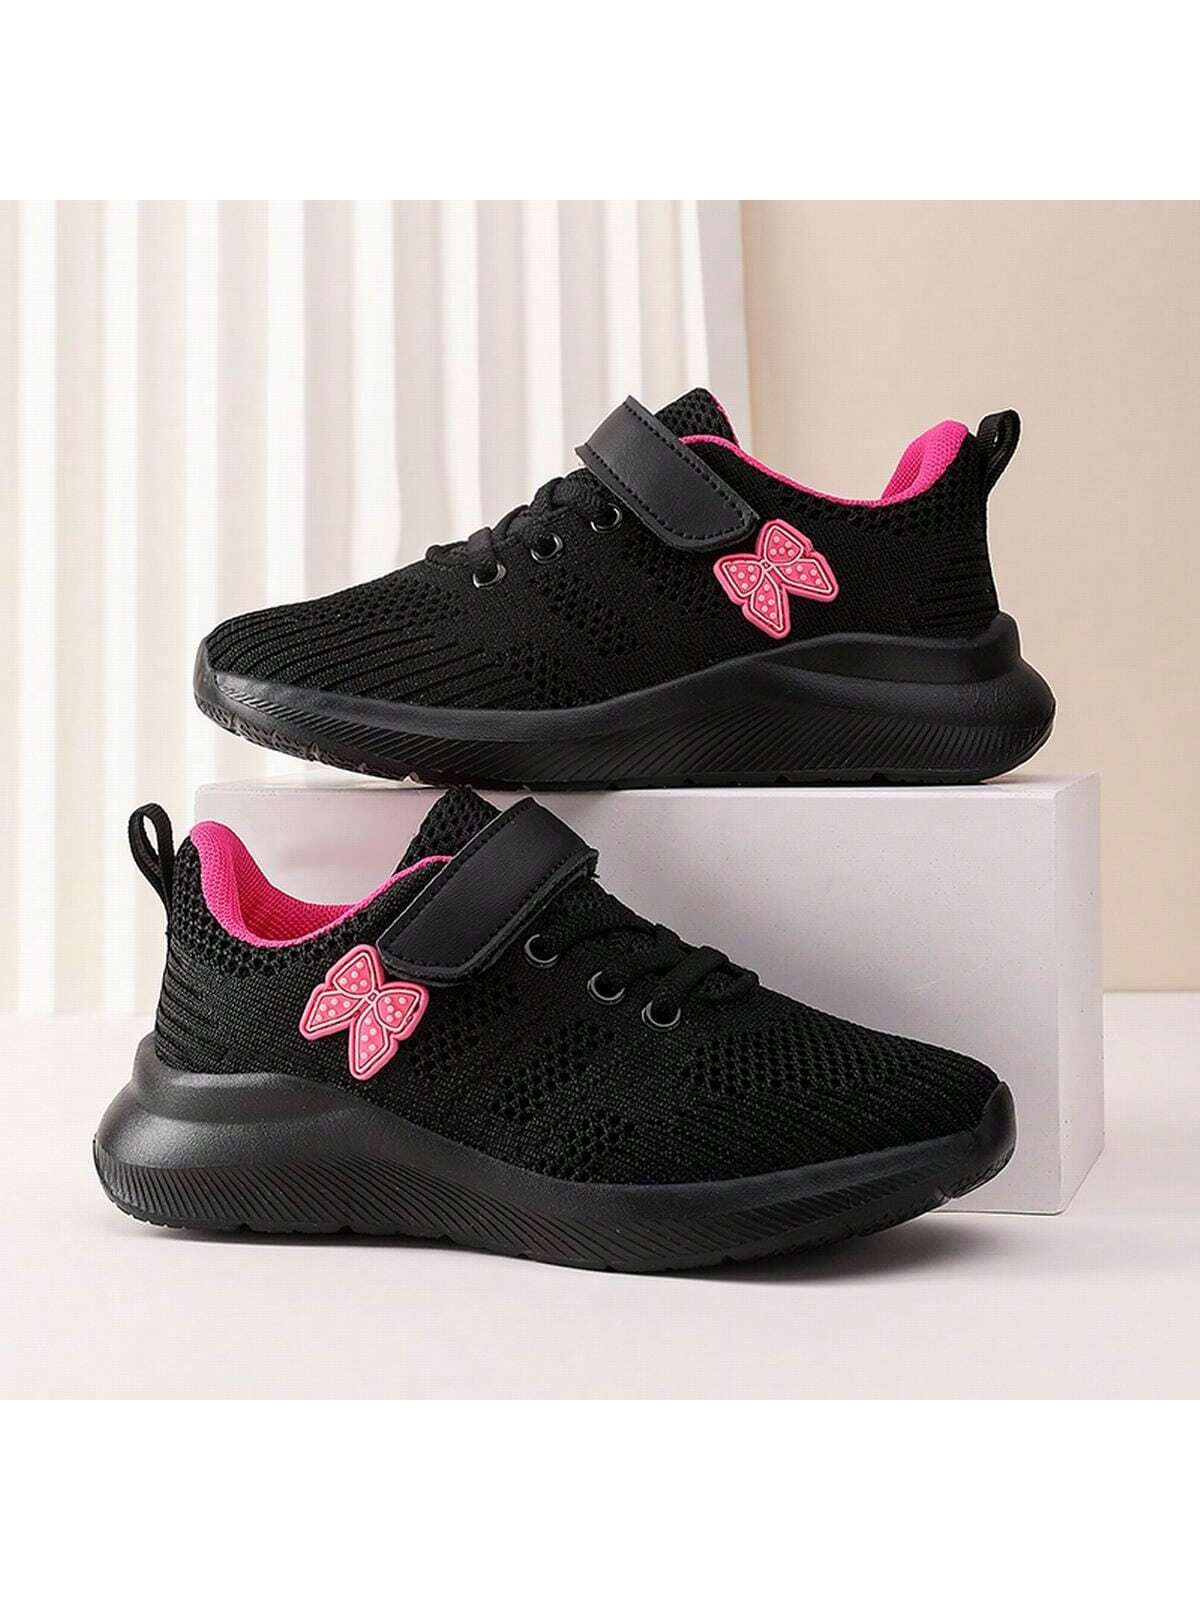 1 Pair Lightweight & Comfortable Women'S Athletic Shoes, Casual Breathable Mesh Running Shoes, All-Match Summer Sneakers-Black-1